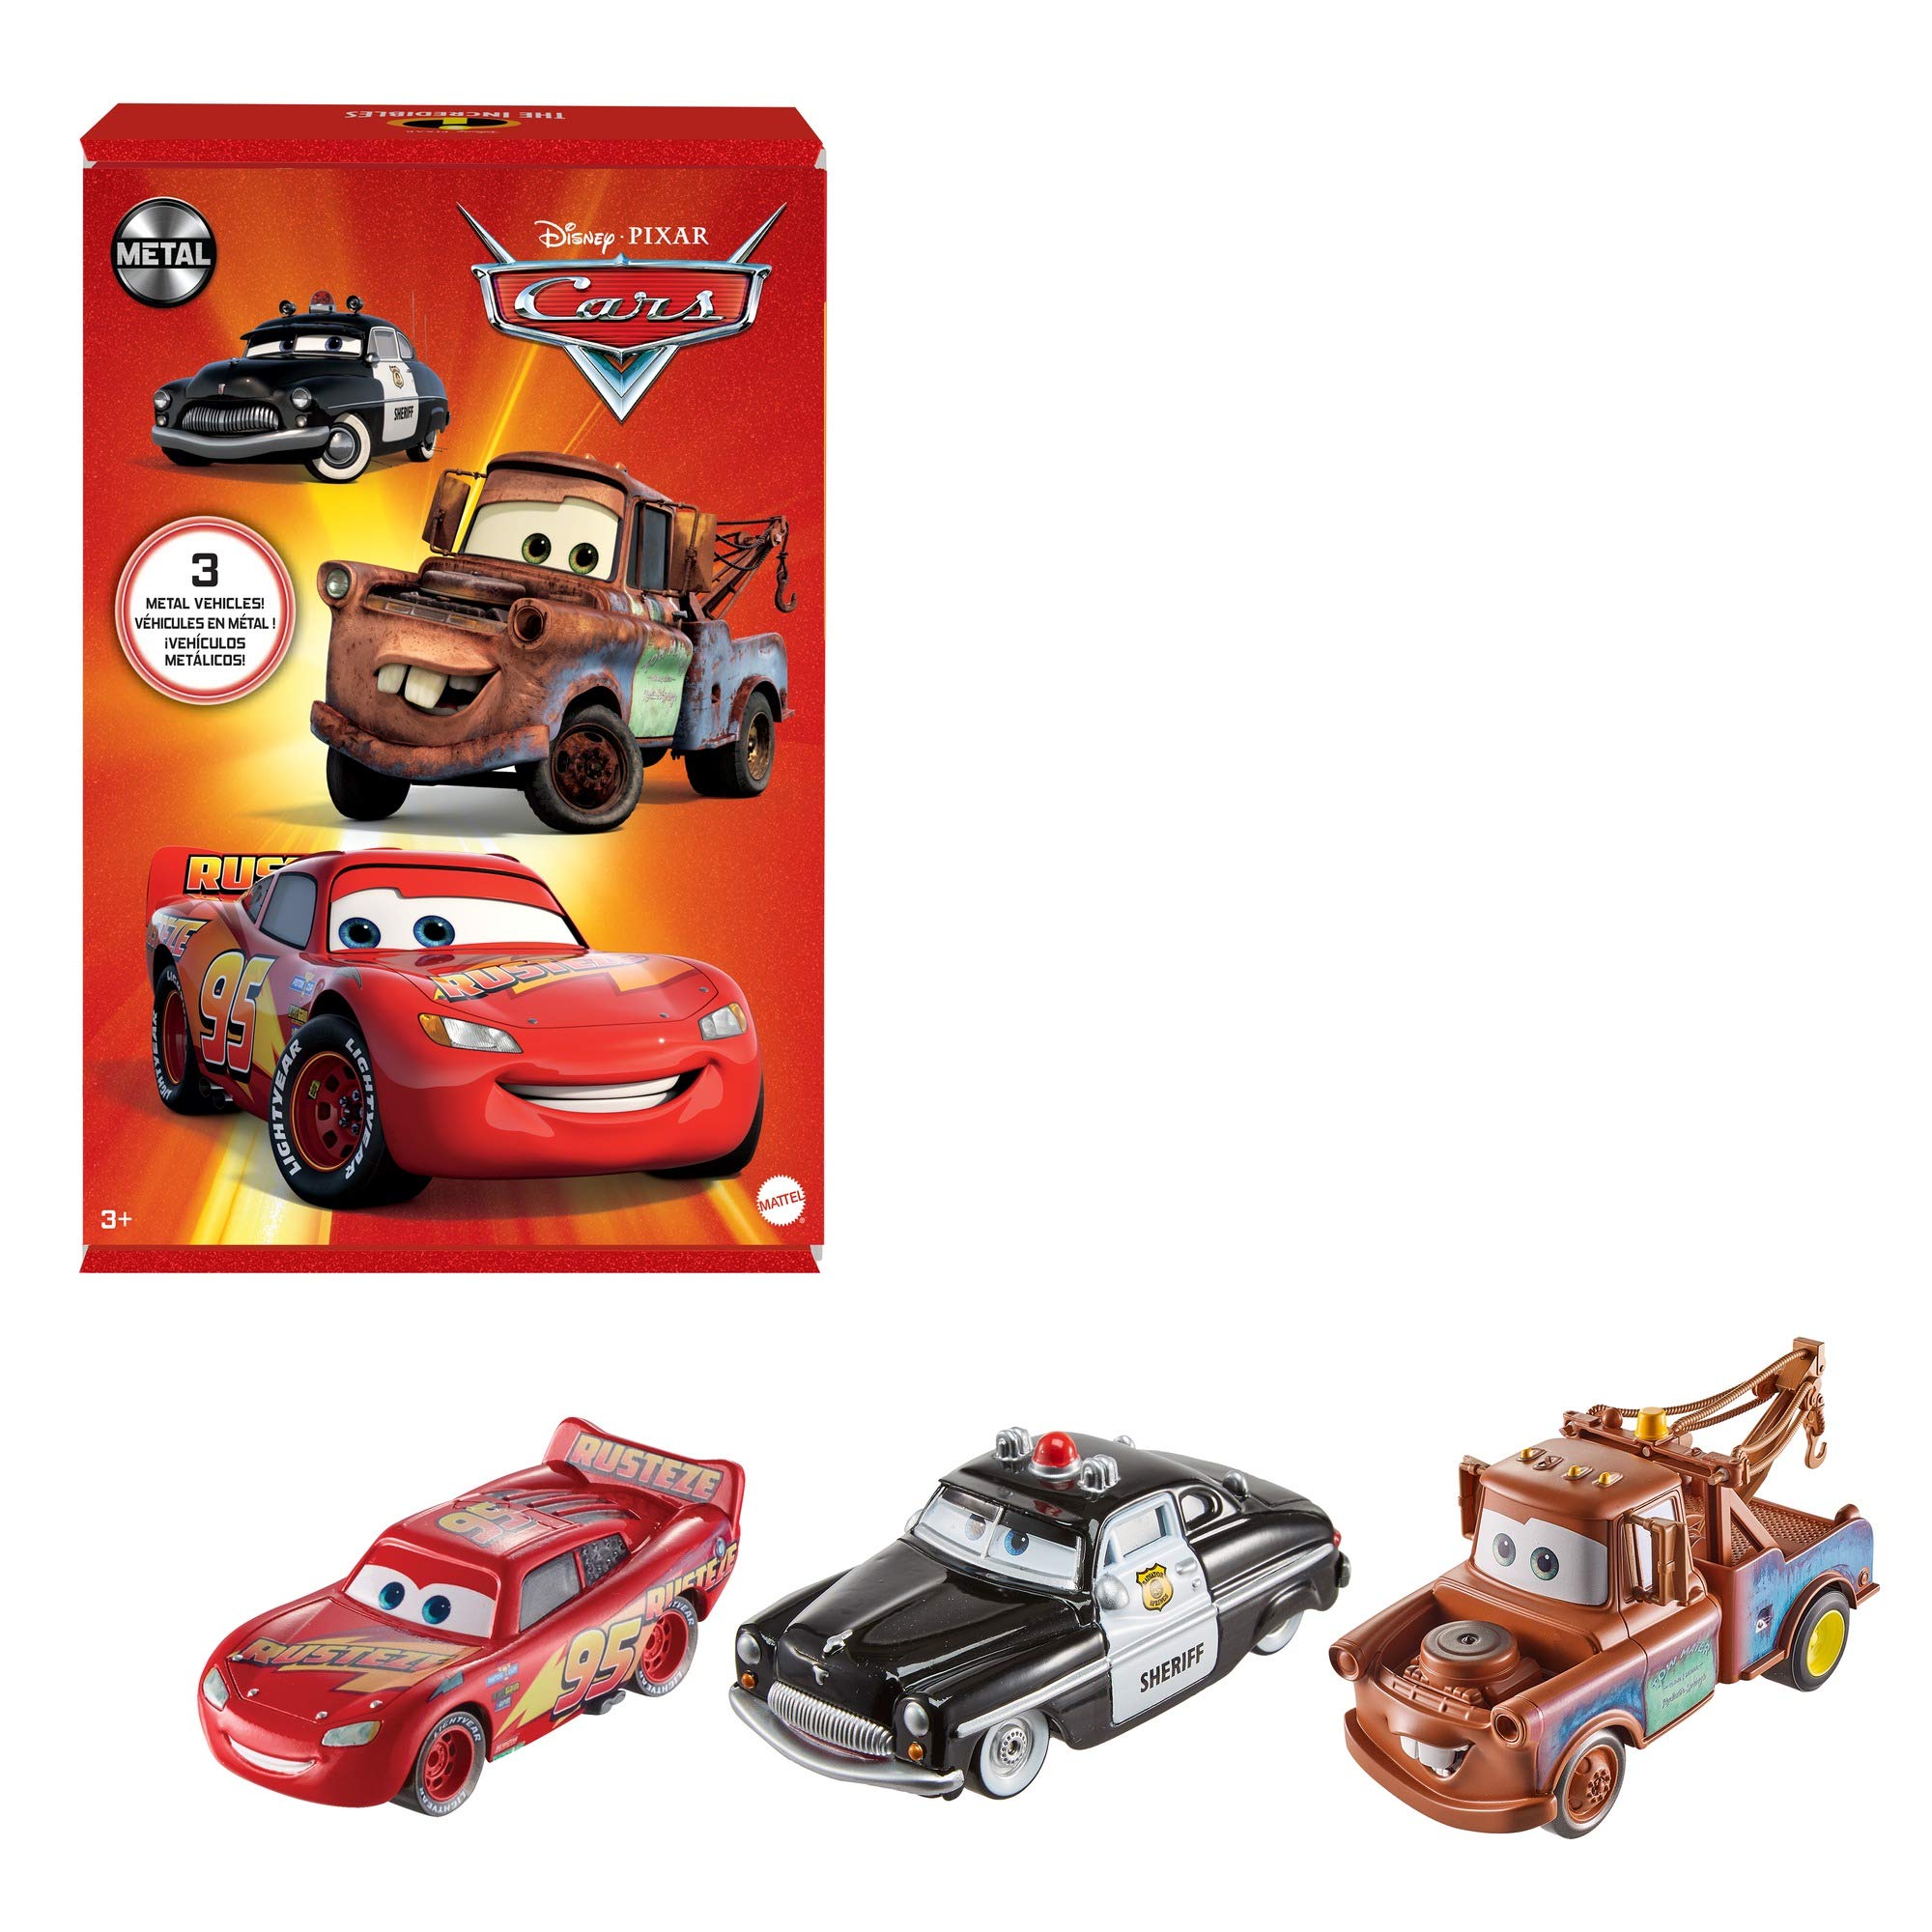 Disney Cars Toys, Radiator Springs 3-Pack of Die-Cast Toy Cars & Trucks with Lightning McQueen, Mater & Sheriff